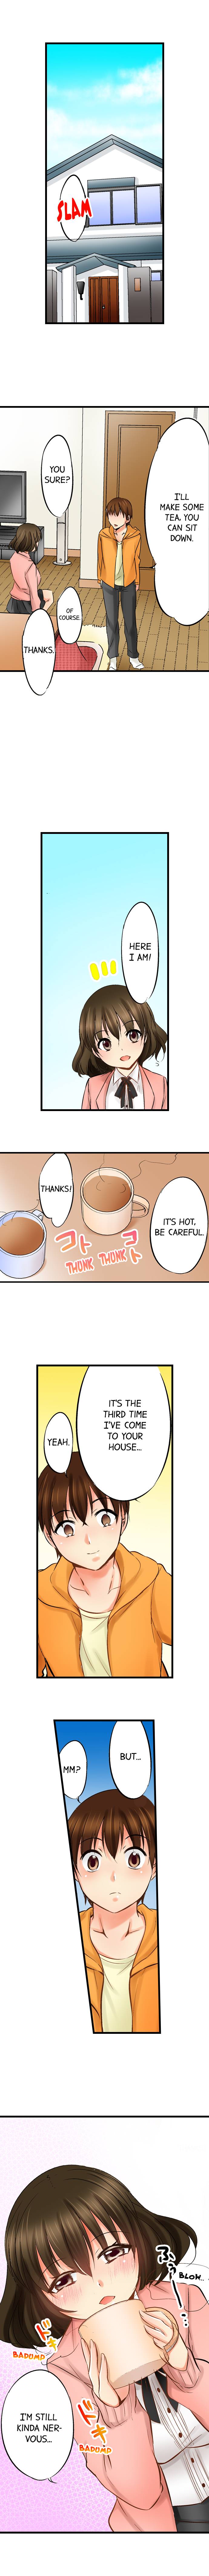 Touching My Older Sister Under the Table - Chapter 7 Page 5